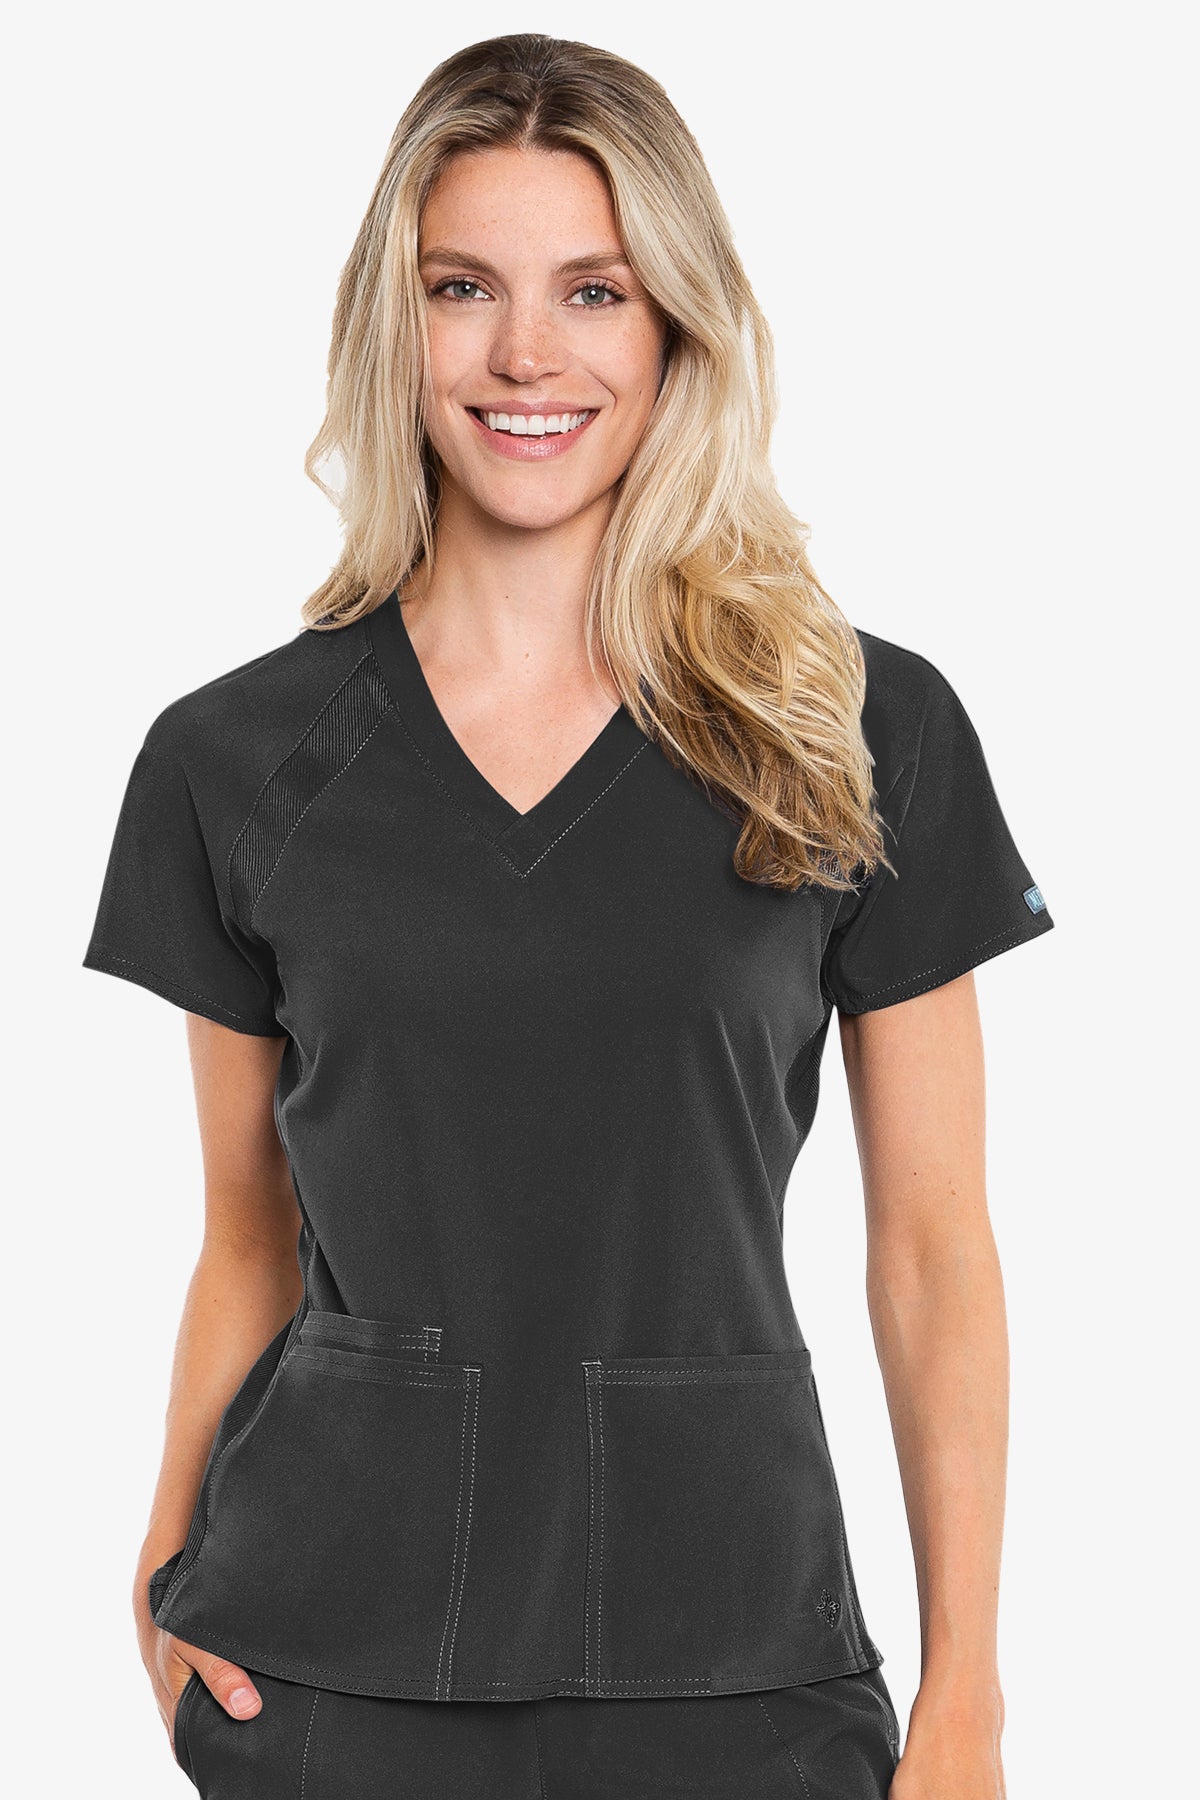 Med Couture Scrub Top Peaches Raglan V-Neck in Black at Parker's Clothing and Shoes.